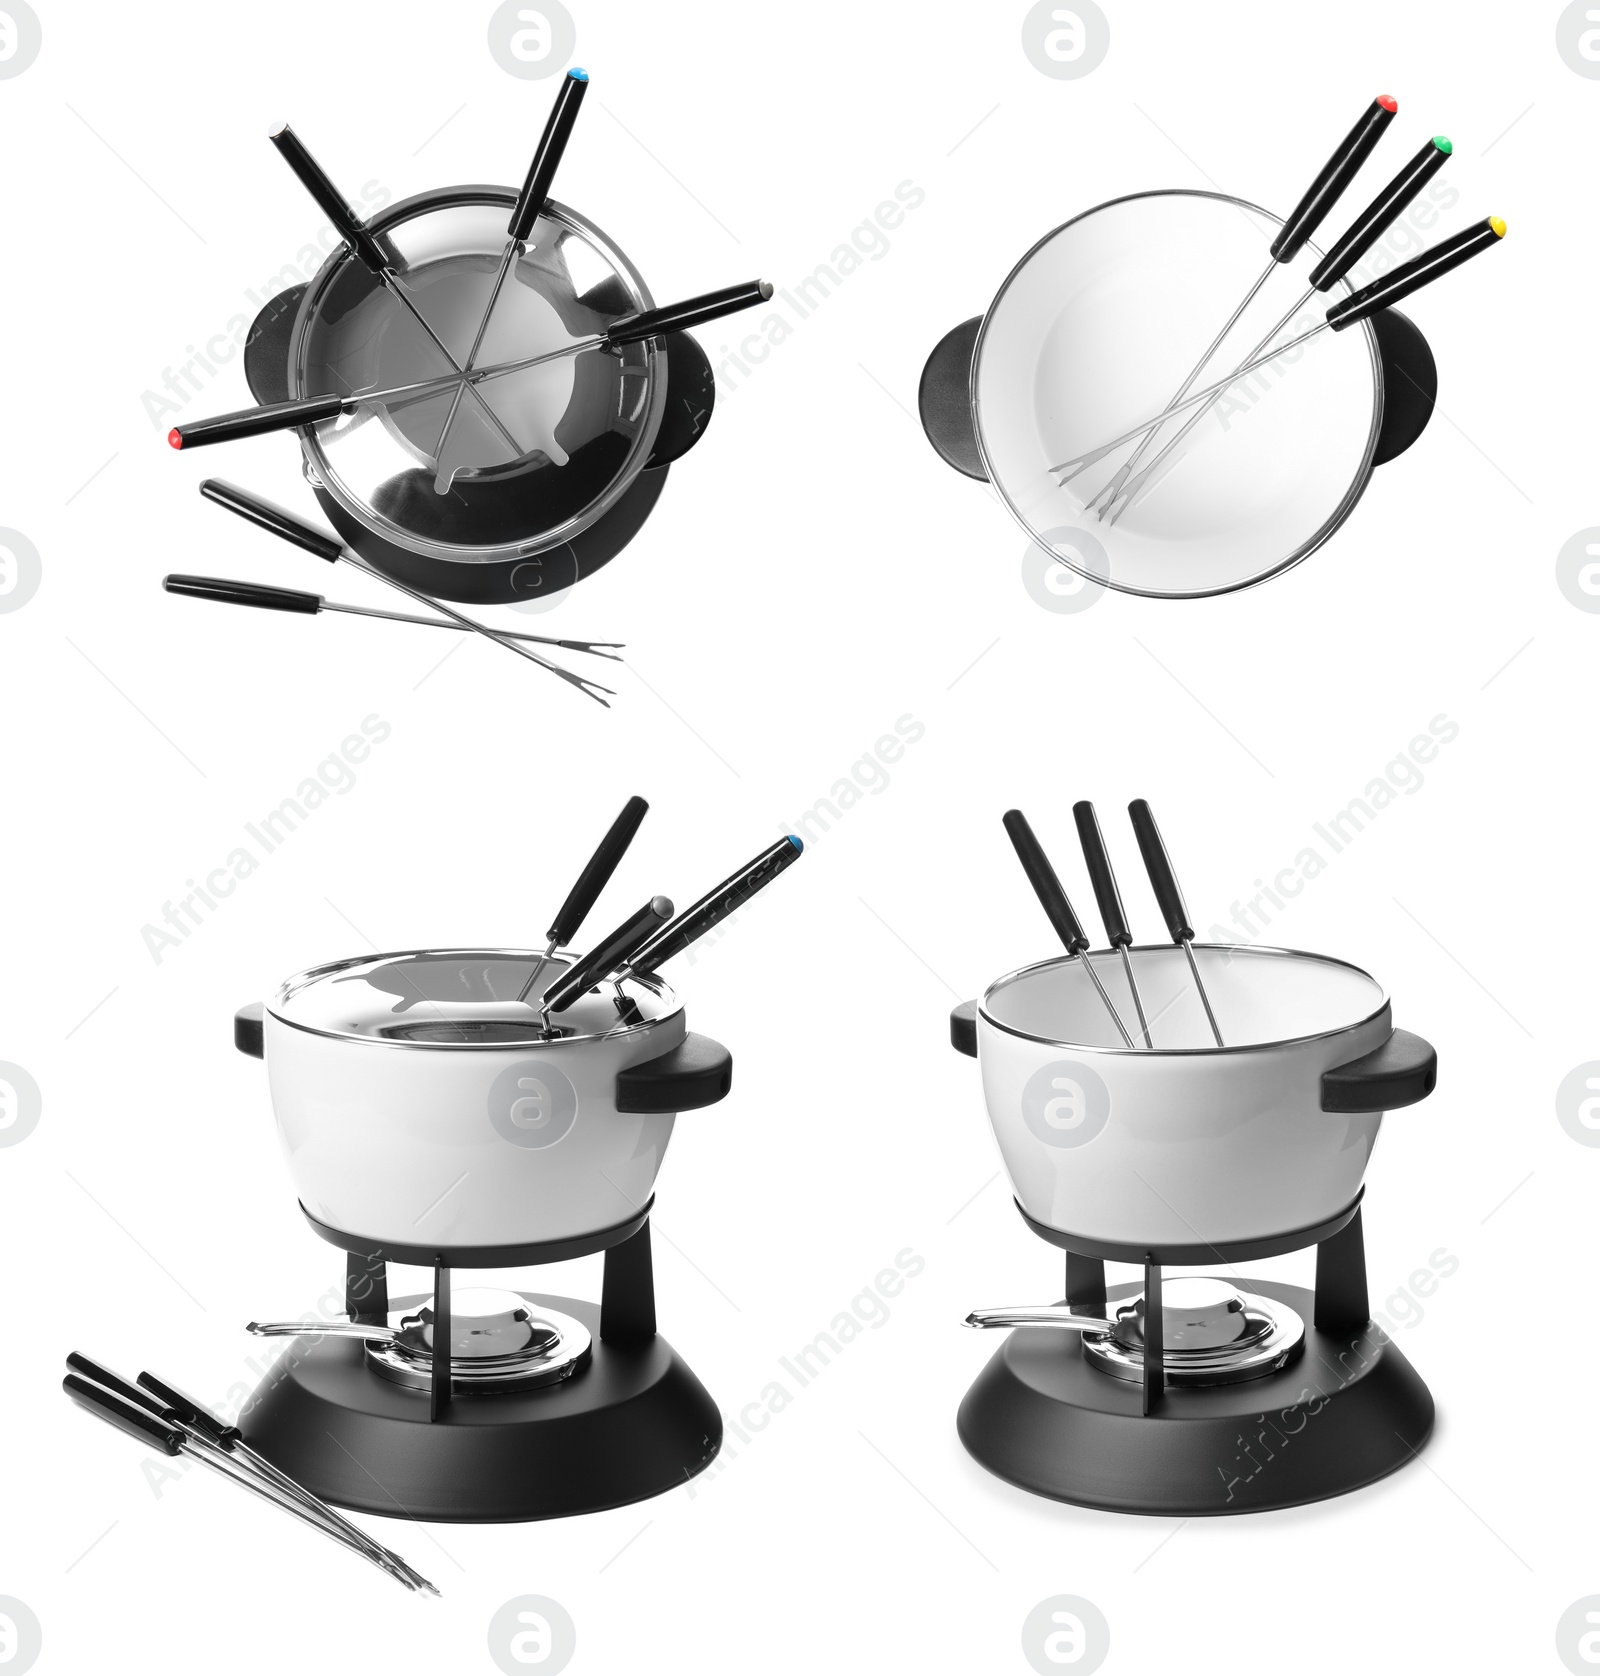 Image of Modern fondue sets on white background, collage